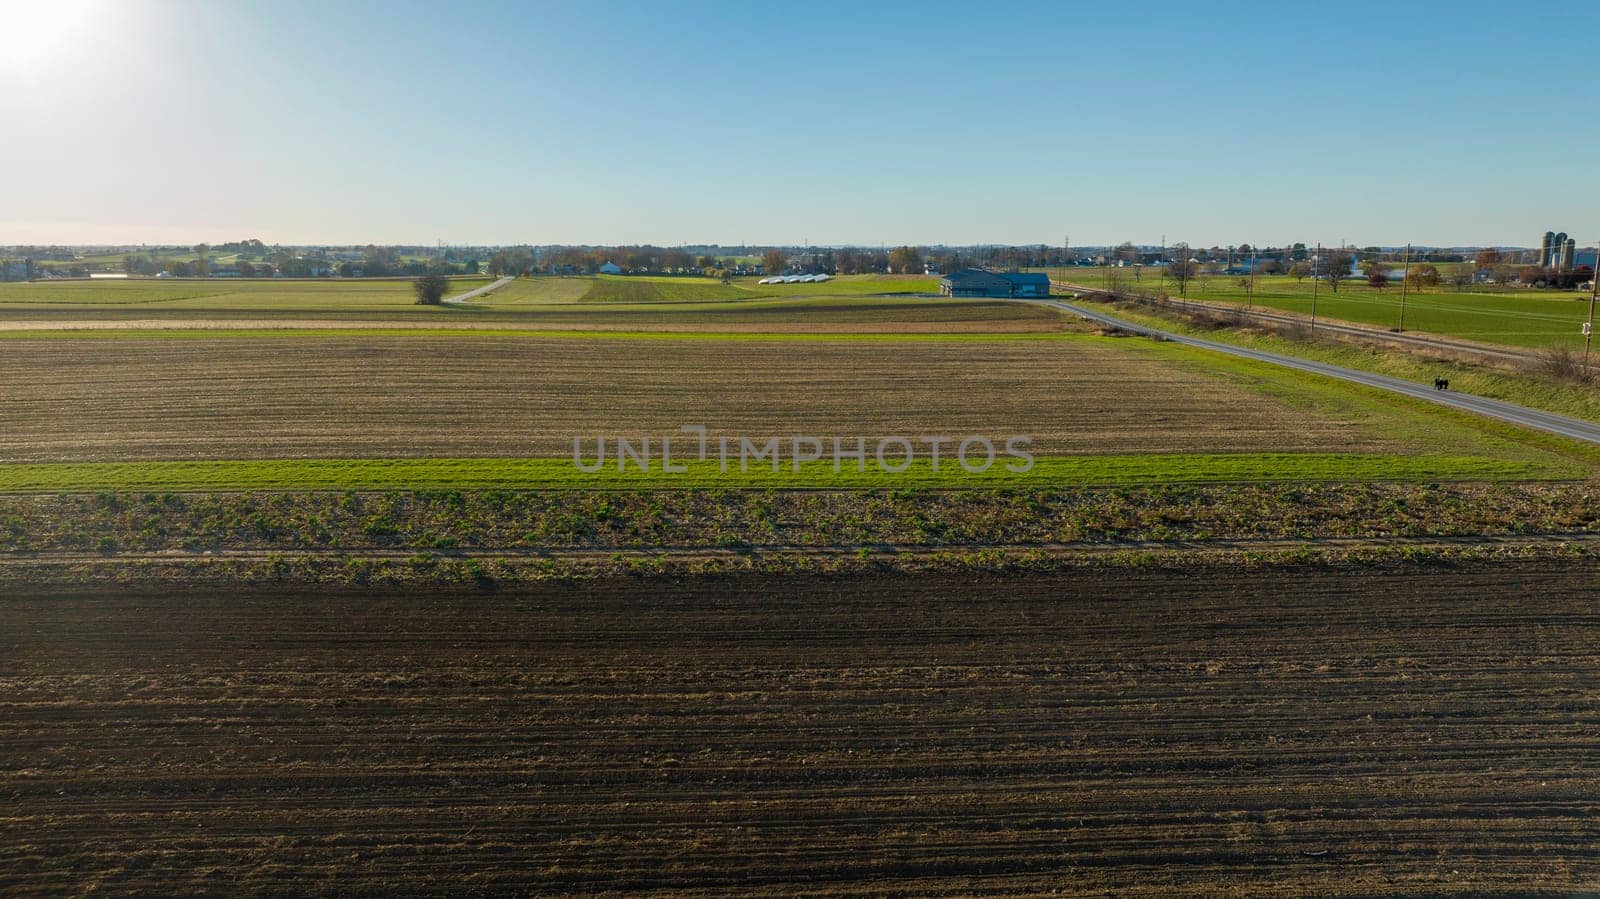 Under clear blue skies, this image spans suburban farmland and its harmonious blend of fields, ideal for real estate and urban planning concepts.